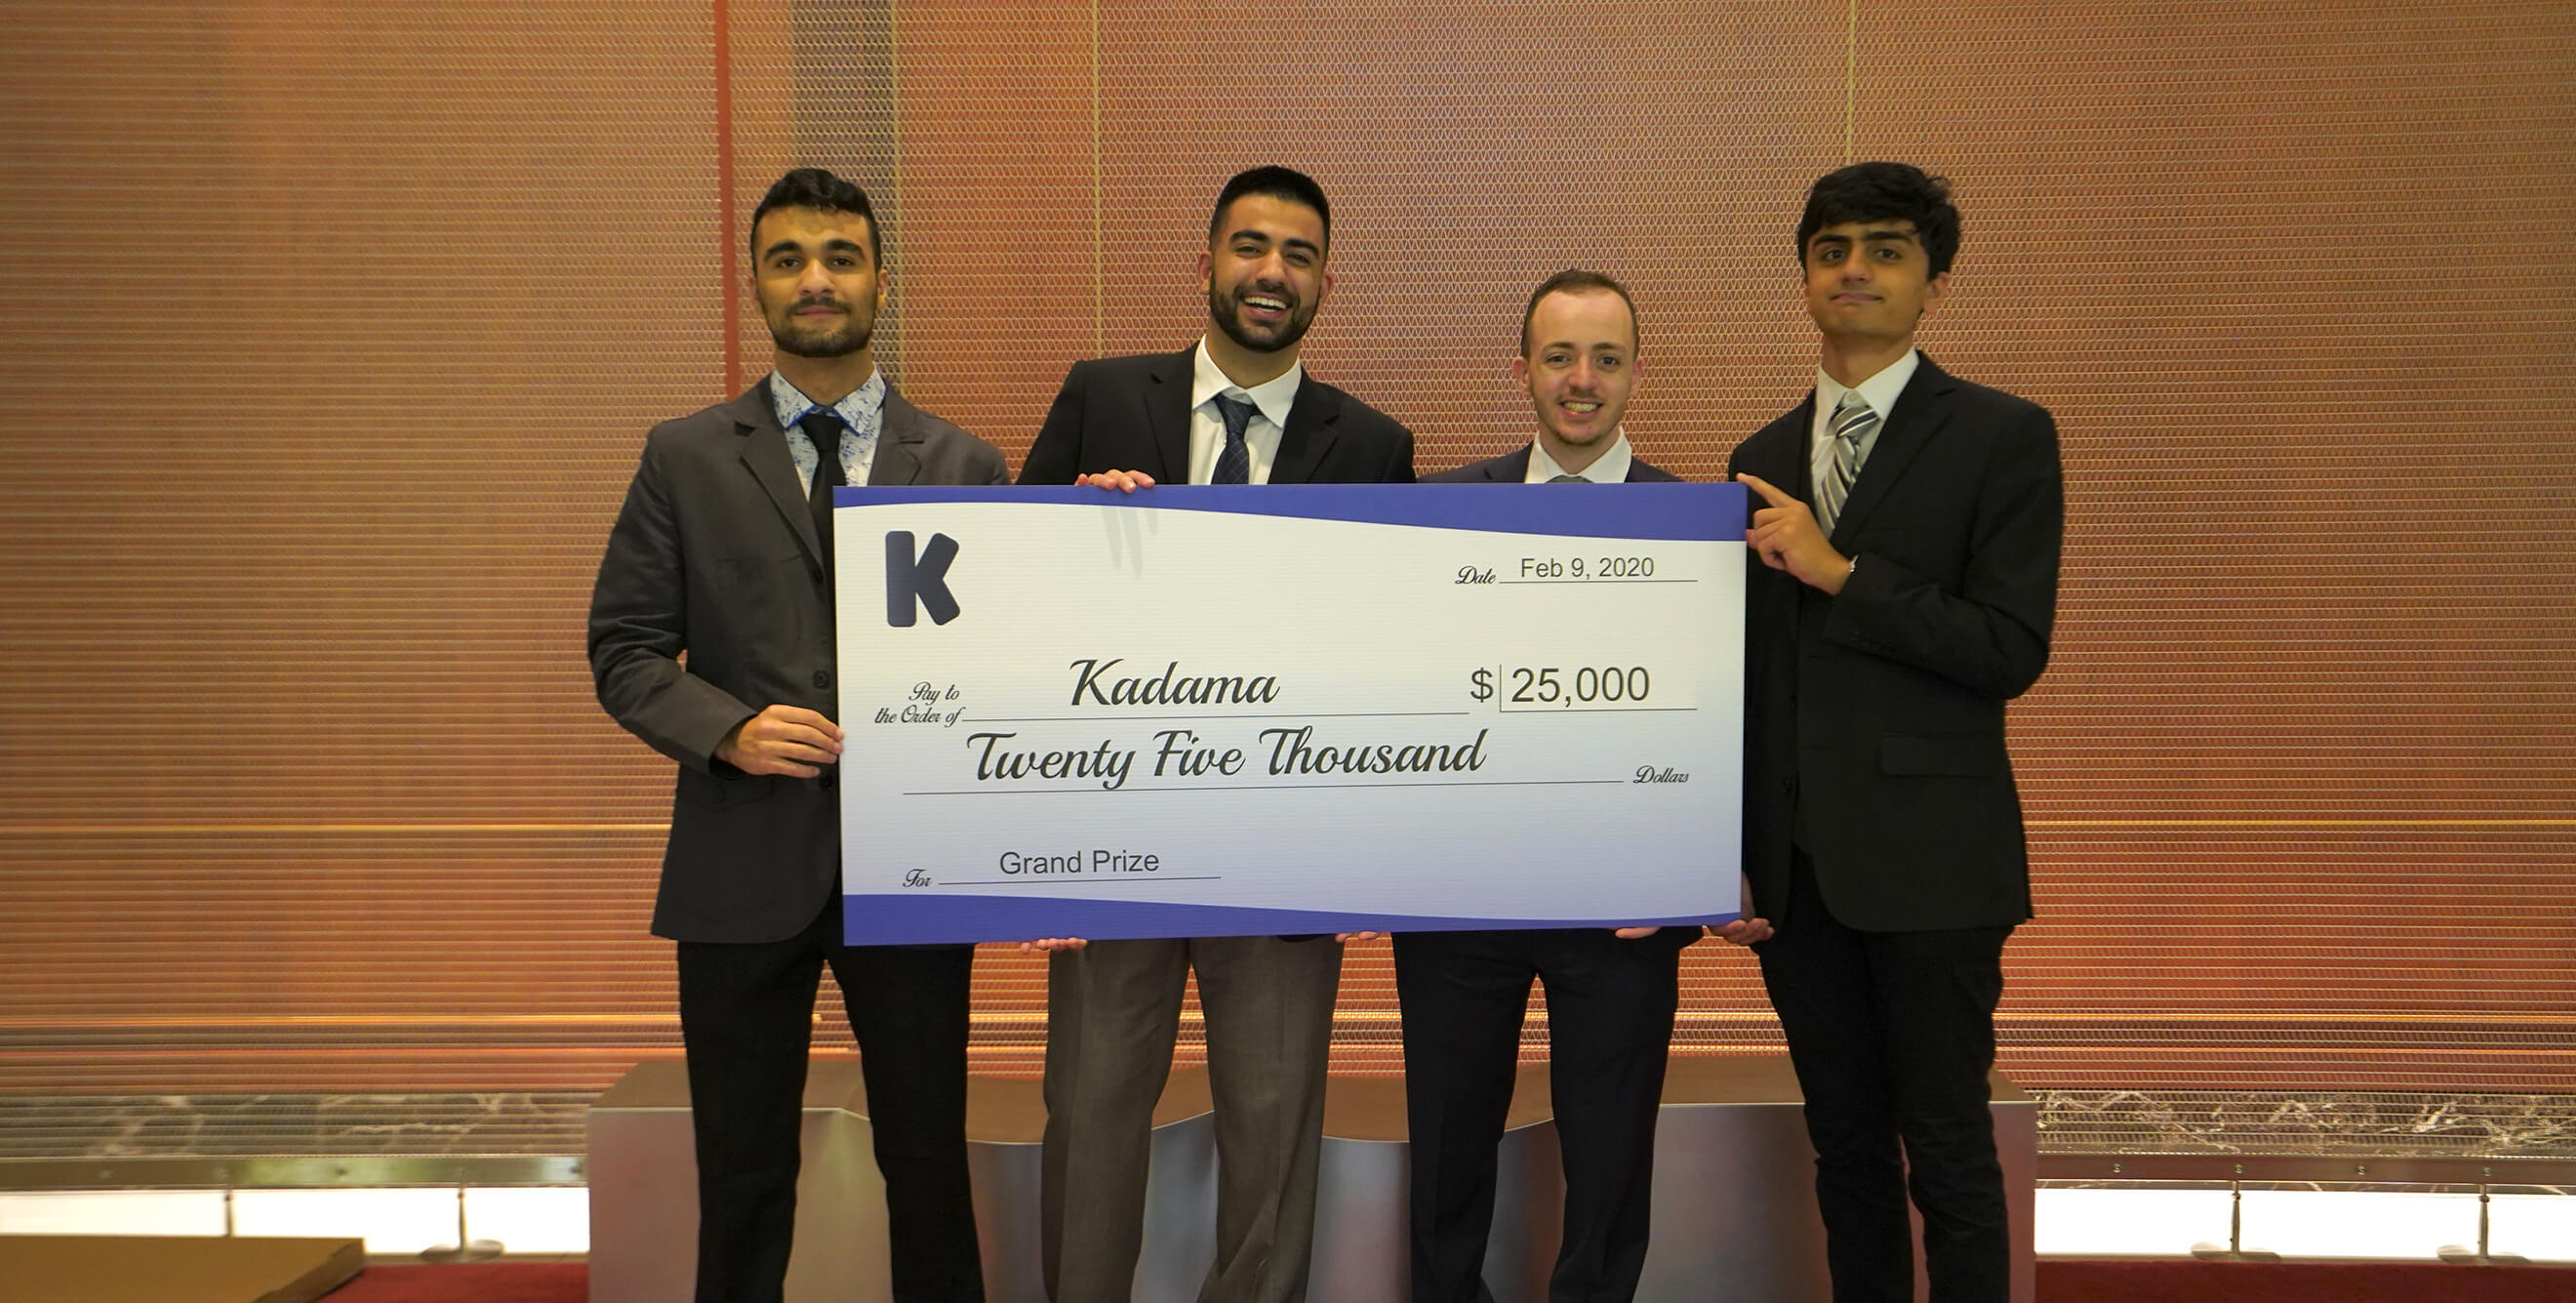 Kadama team holding up a $25,000 check for completing the University of Washington Foster Jones Accelerator